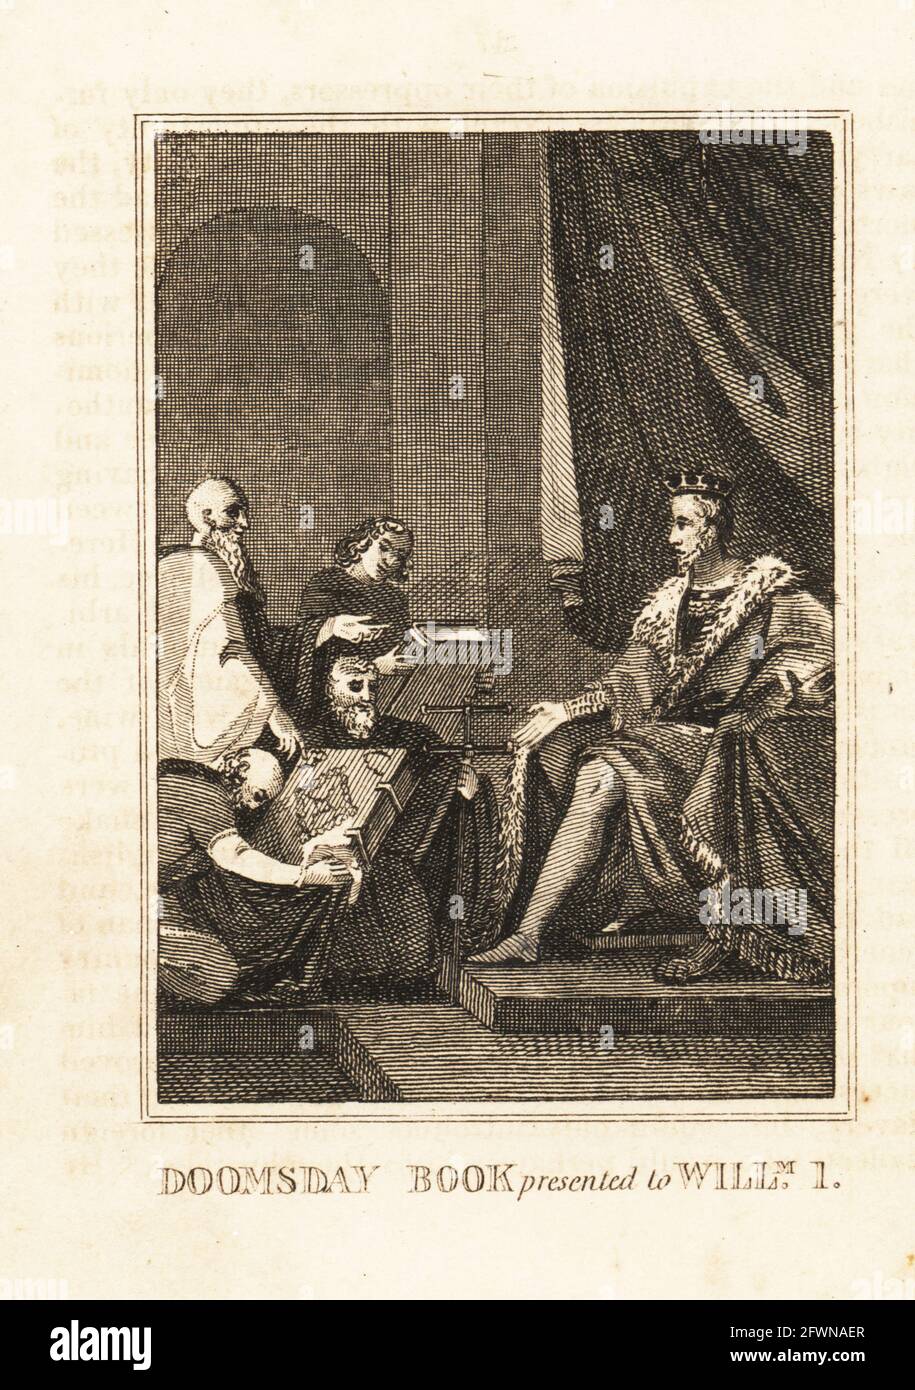 King William I of England receiving the Domesday Book in 1086. Doomsday Book presented to William I. Copperplate engraving from M. A. Jones’ History of England from Julius Caesar to George IV, G. Virtue, 26 Ivy Lane, London, 1836. Stock Photo